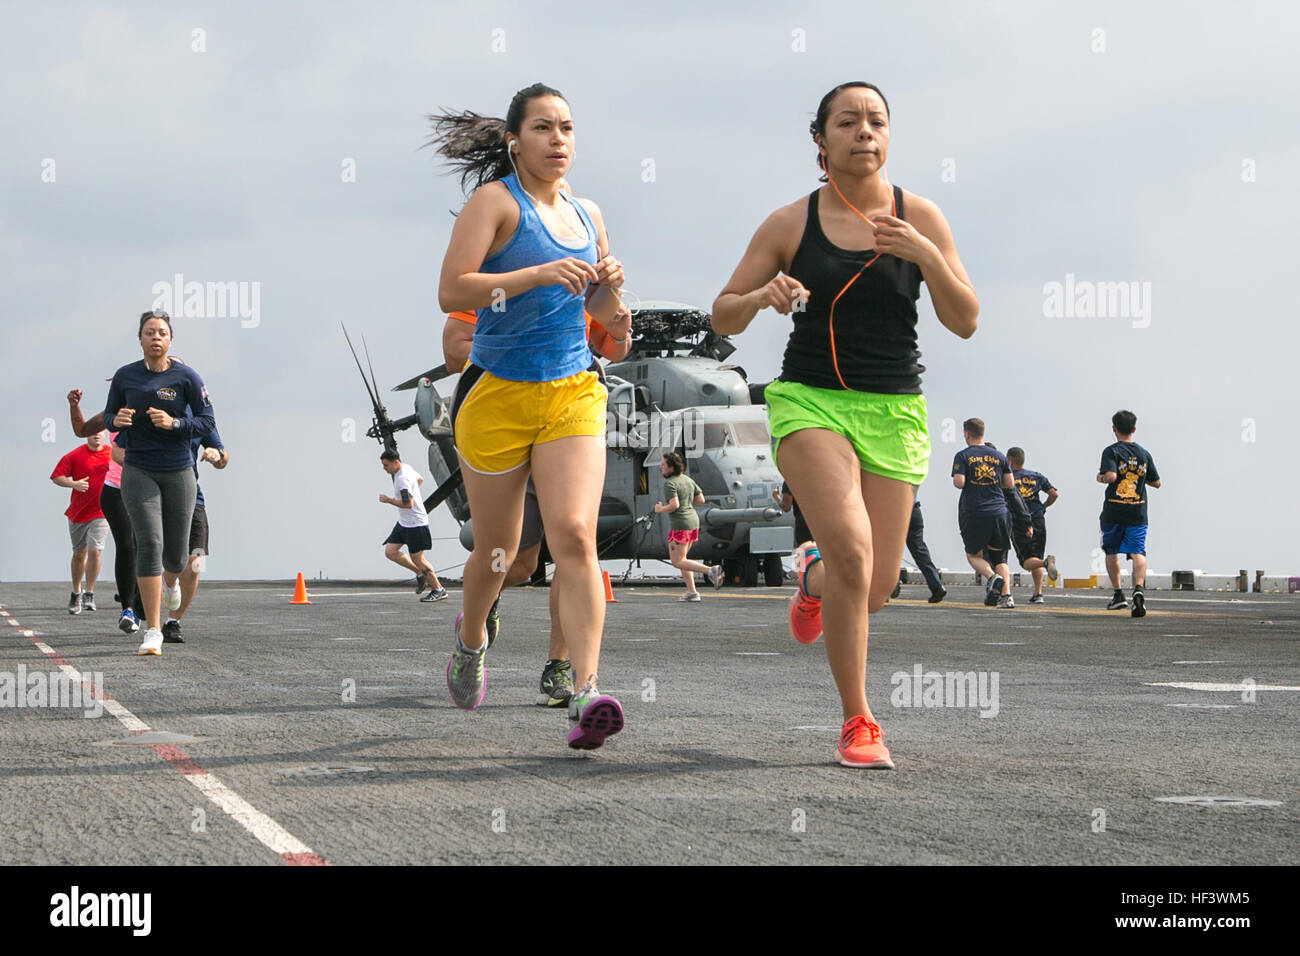 At sea. (March 27, 2016)-U.S. Marines Sgt. Priscilla Castillo and Sgt Liliana Sandoval, 13th Marine Expeditionary Unit listen to music as they participate in a 5k run for women's history month, March 27, 2016, during the MEU's western pacific deployment aboard the USS Boxer. More then 4,500 Marines and Sailors from the Boxer ARG, 13th MEU team are currently transiting the Pacific Ocean toward the U.S. 5th fleet area of operations during a scheduled deployment. (U.S. Marine Corps photo by Sgt. Briauna Birl/RELEASED) Women's History 5k aboard USS Boxer 160327-M-KR317-070 Stock Photo